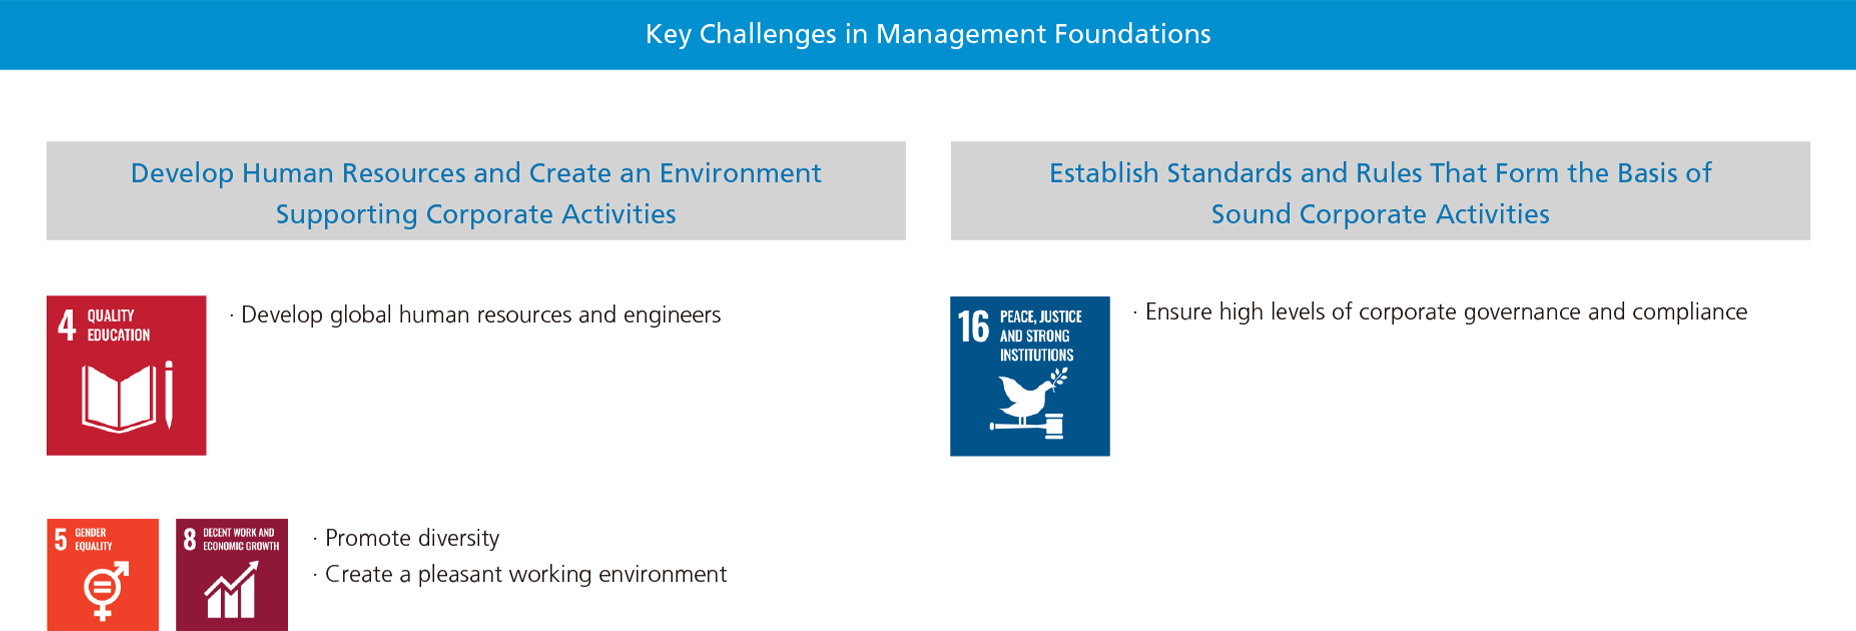 Key Challenges in Management Foundations